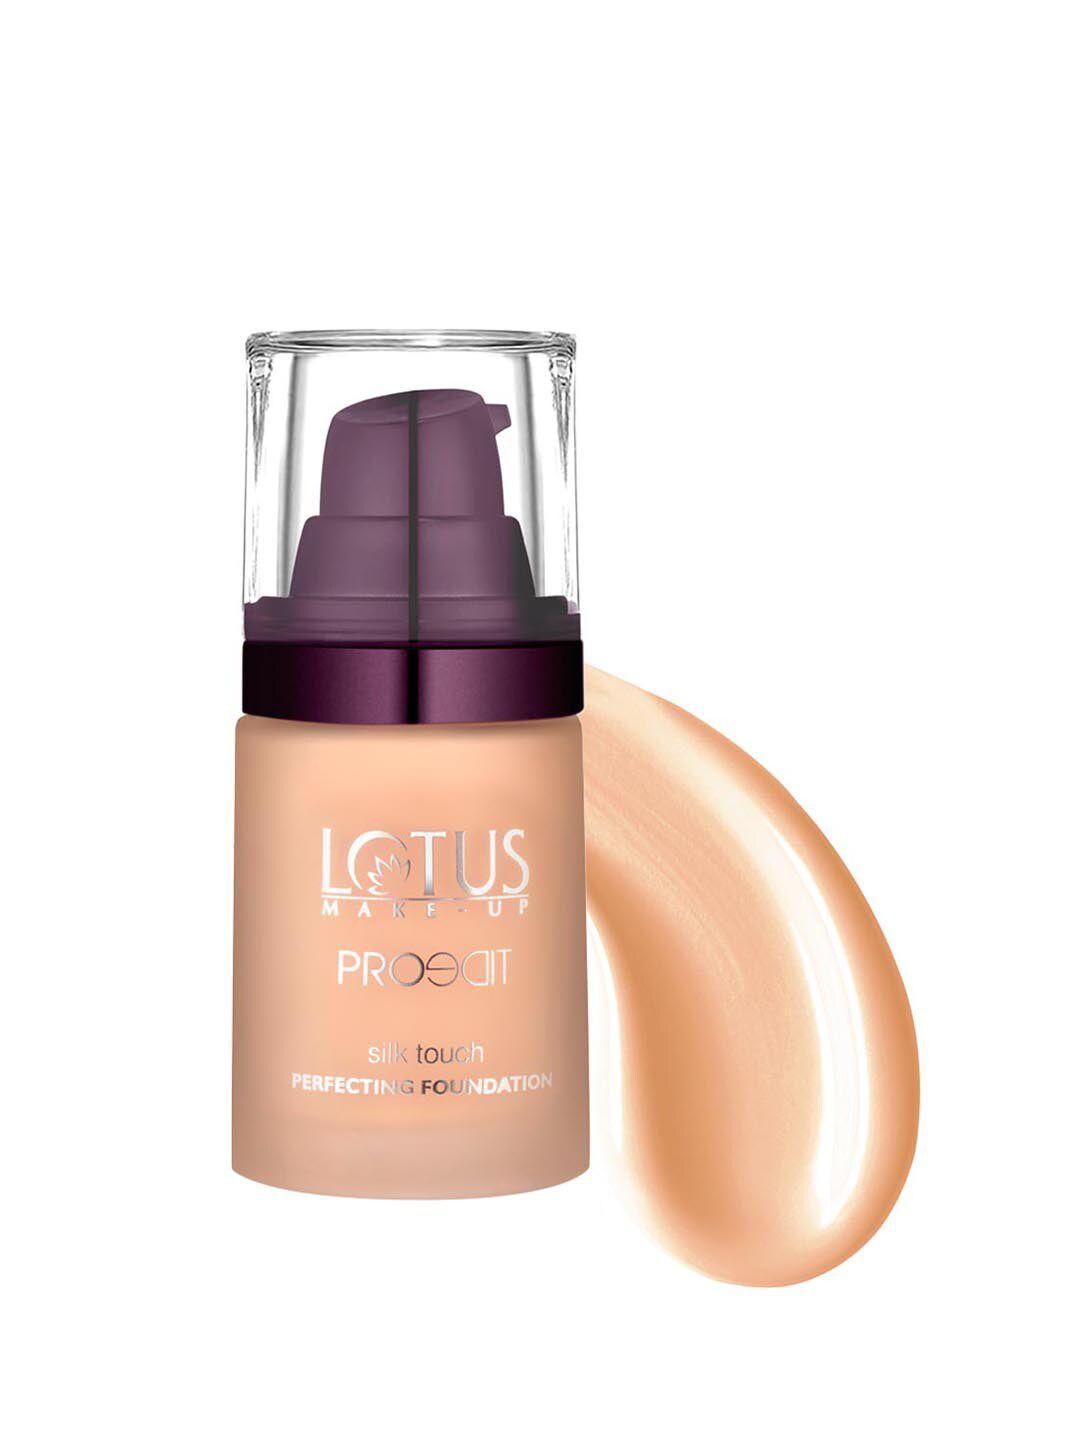 lotus herbals sustainable make-up proedit silk touch perfecting foundation - cocoa sf05 30ml